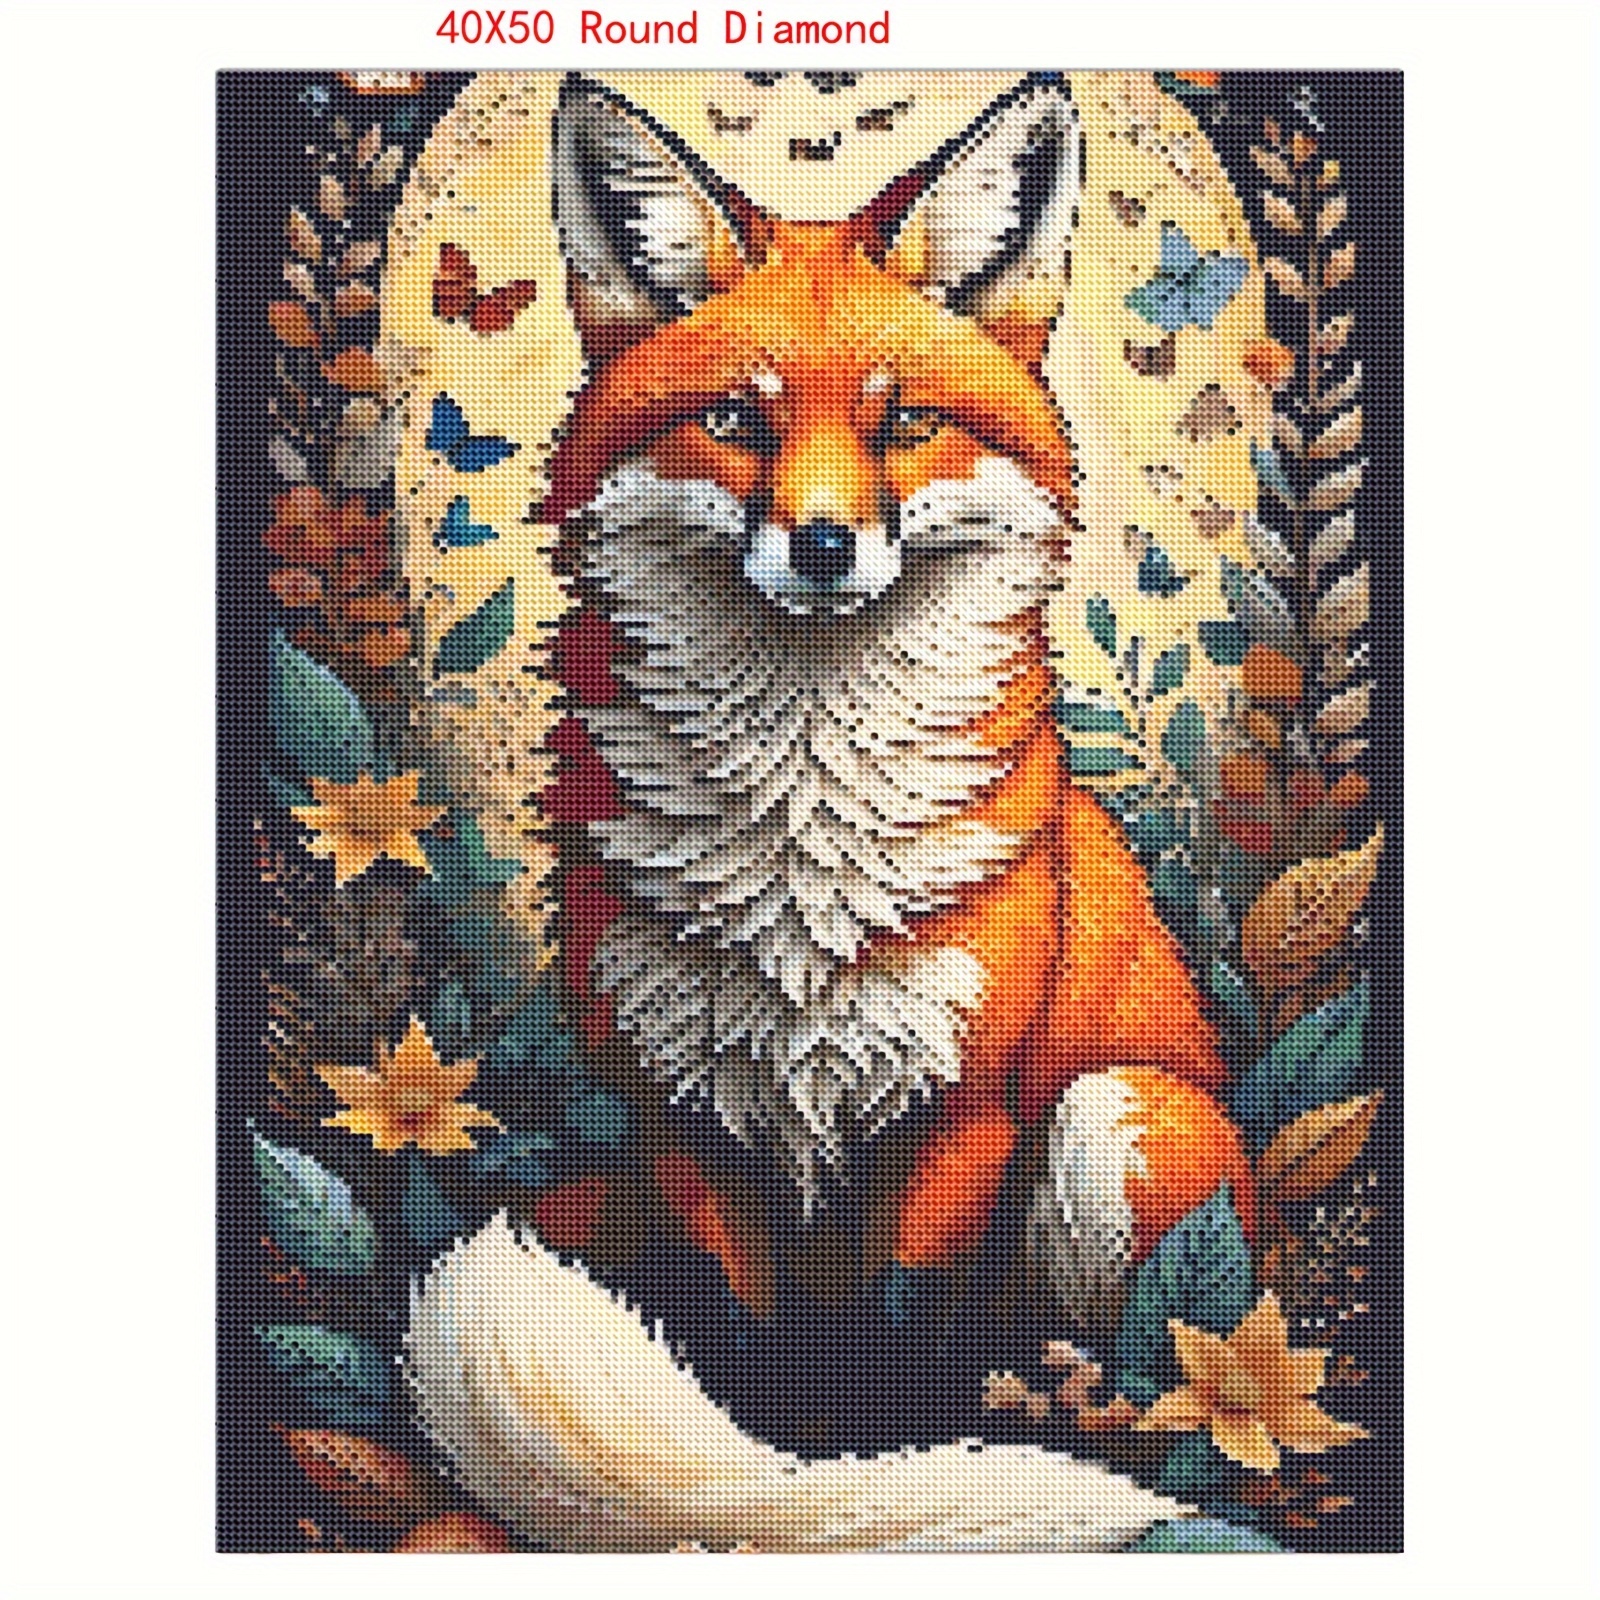 Square Diamond Painting Large Fox 15x19 Inches for Adults Children 5D Diamond Puzzles Painting by Numbers Cross Stitch Animals Rhinestones